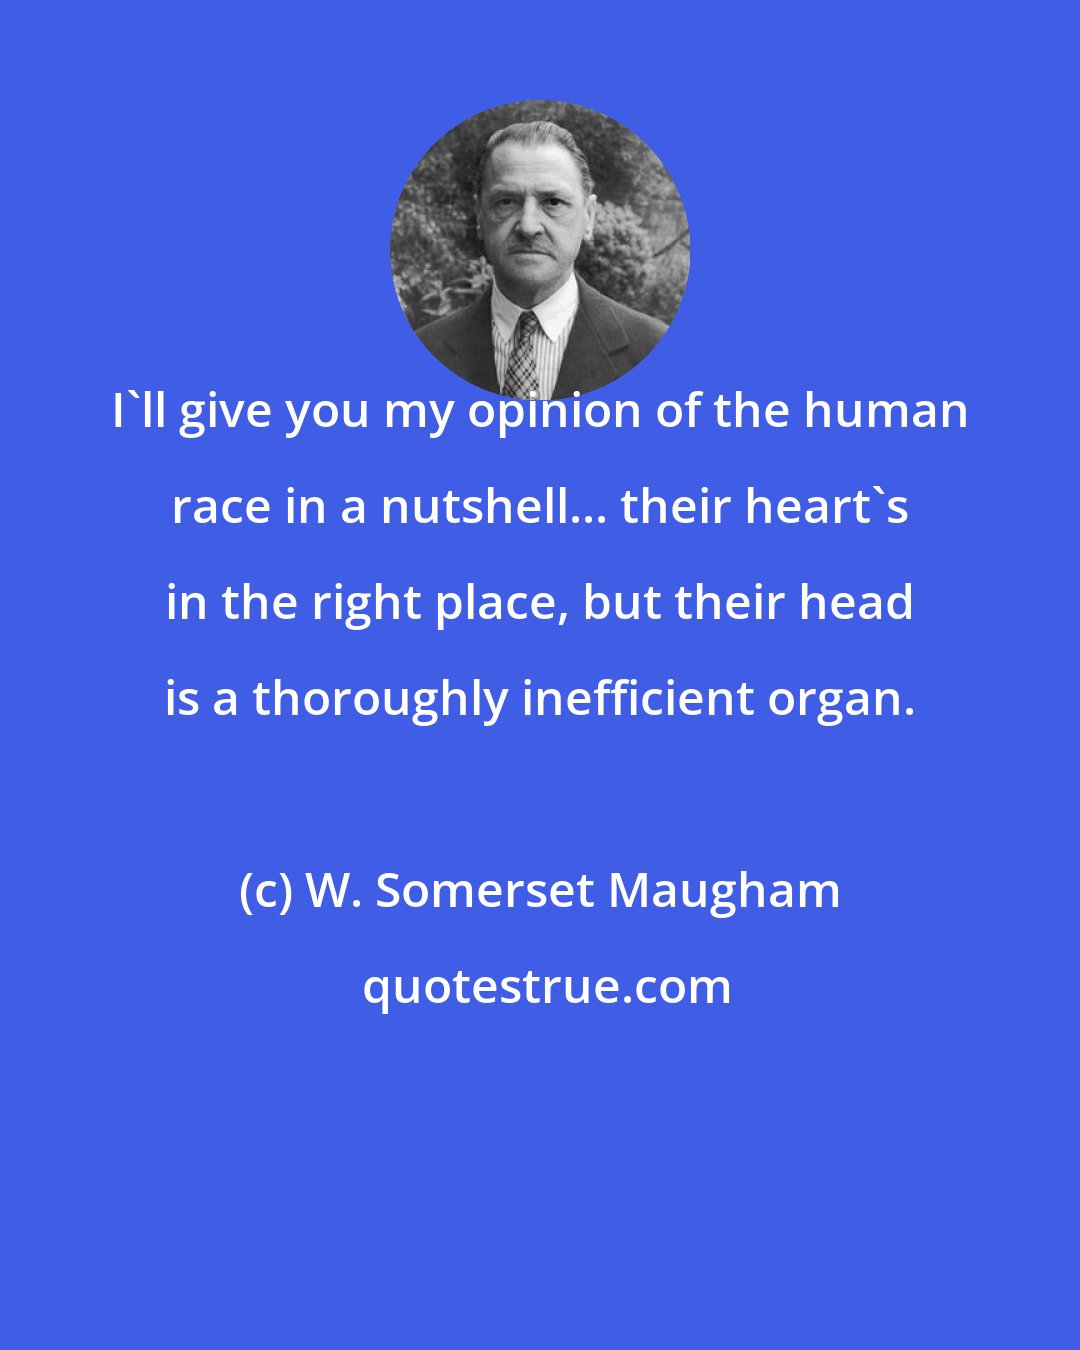 W. Somerset Maugham: I'll give you my opinion of the human race in a nutshell... their heart's in the right place, but their head is a thoroughly inefficient organ.